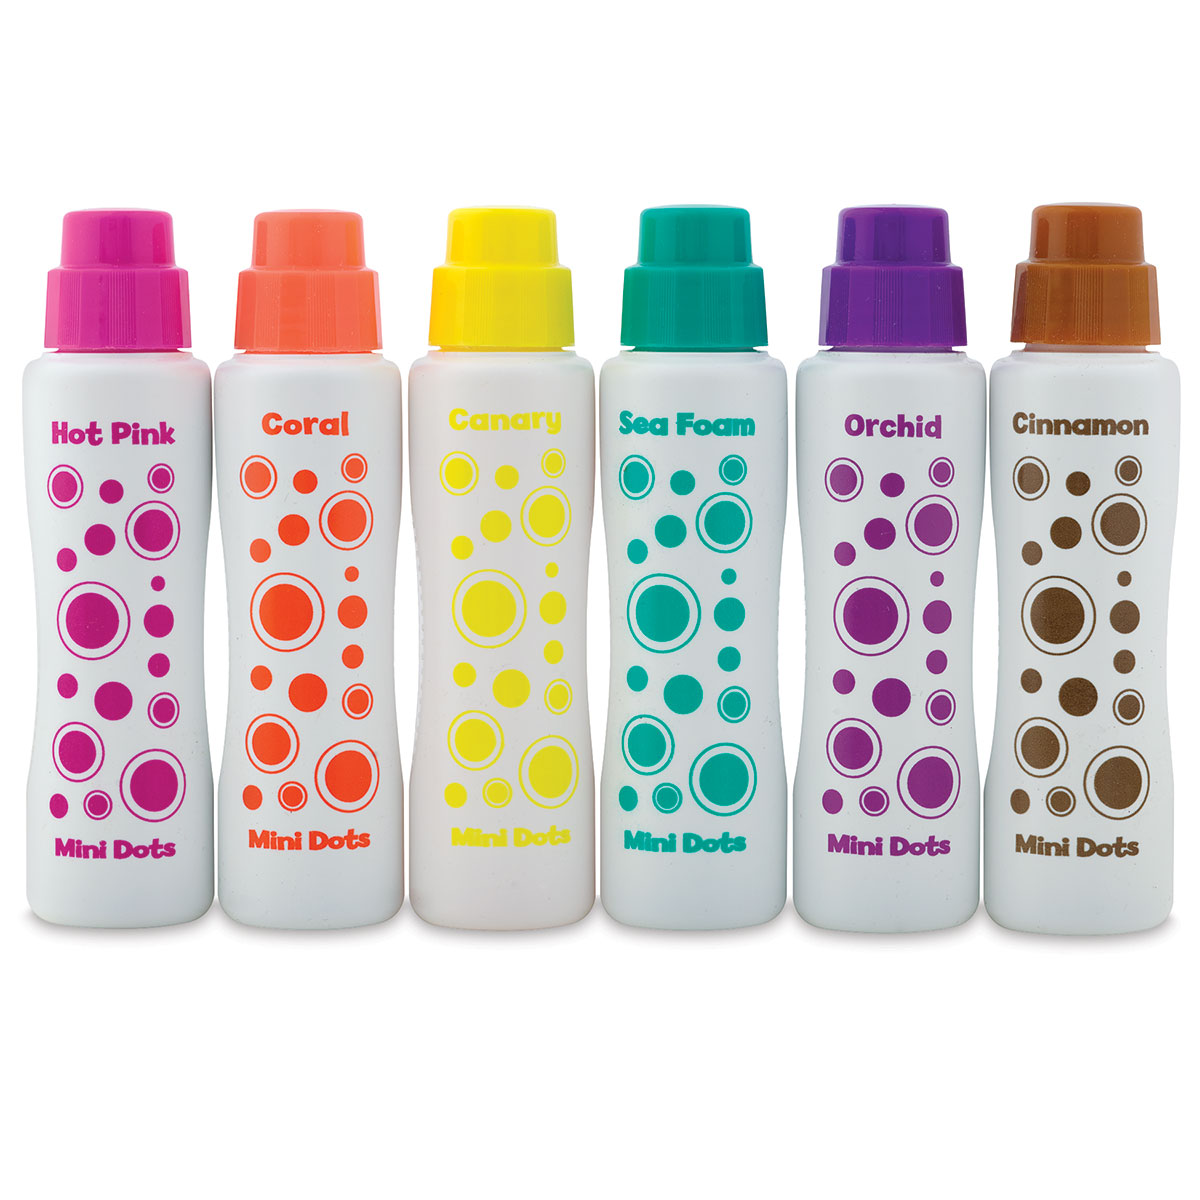 Do-a-Dot Art Markers - Metallic Shimmer Colors, Set of 5